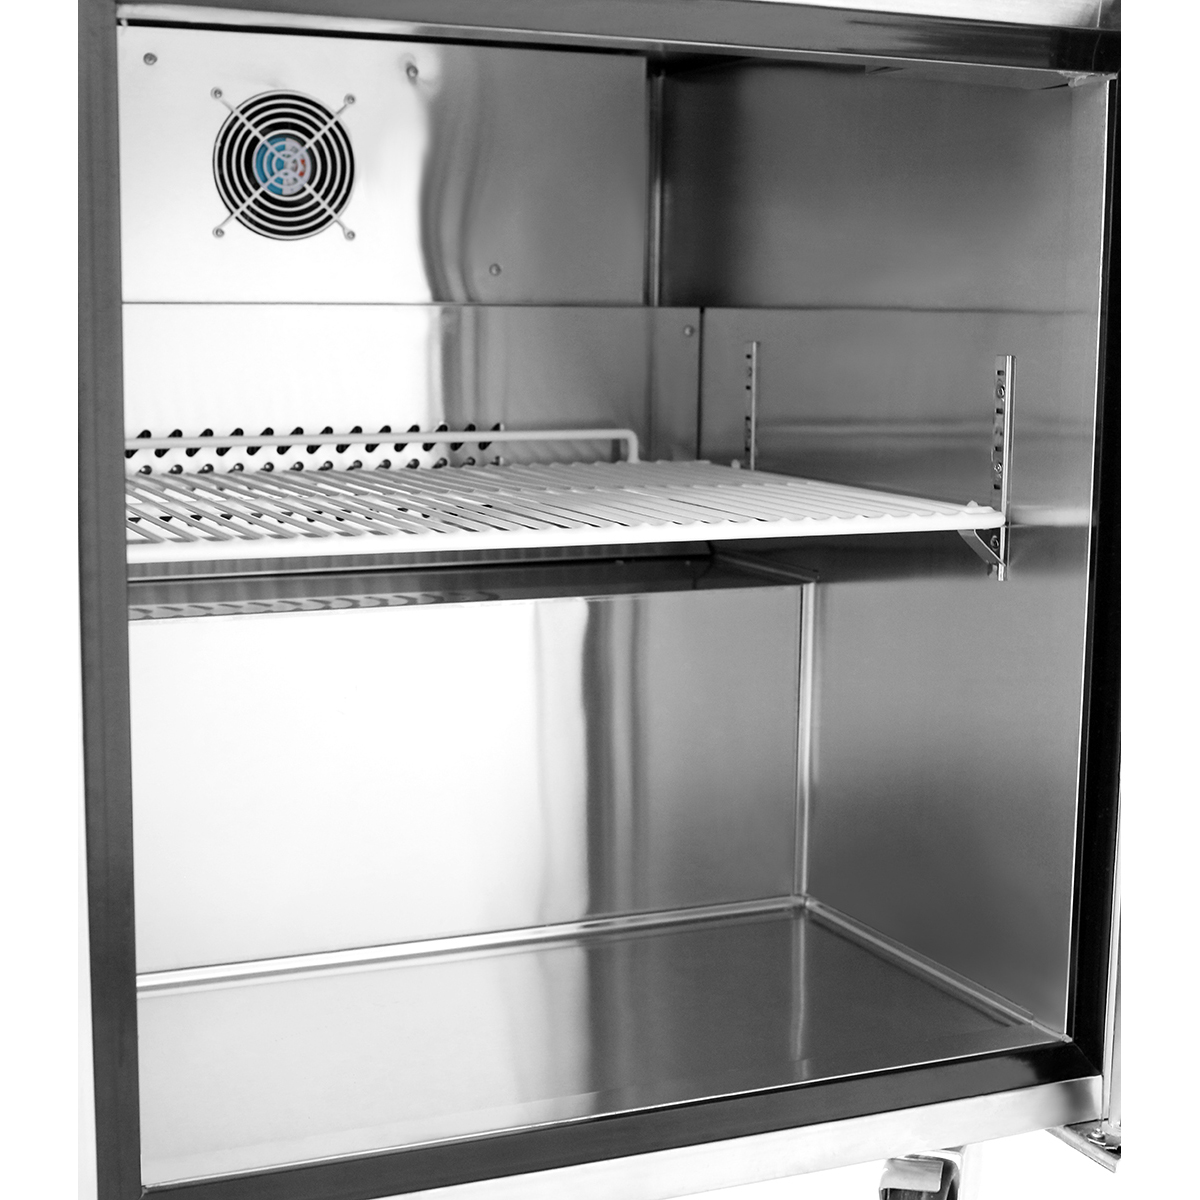 Atosa MGF8405GR Rear Mount Undercounter Freezer 27-1/2"W x 30"D x 34-1/8"H with Solid Door image 2